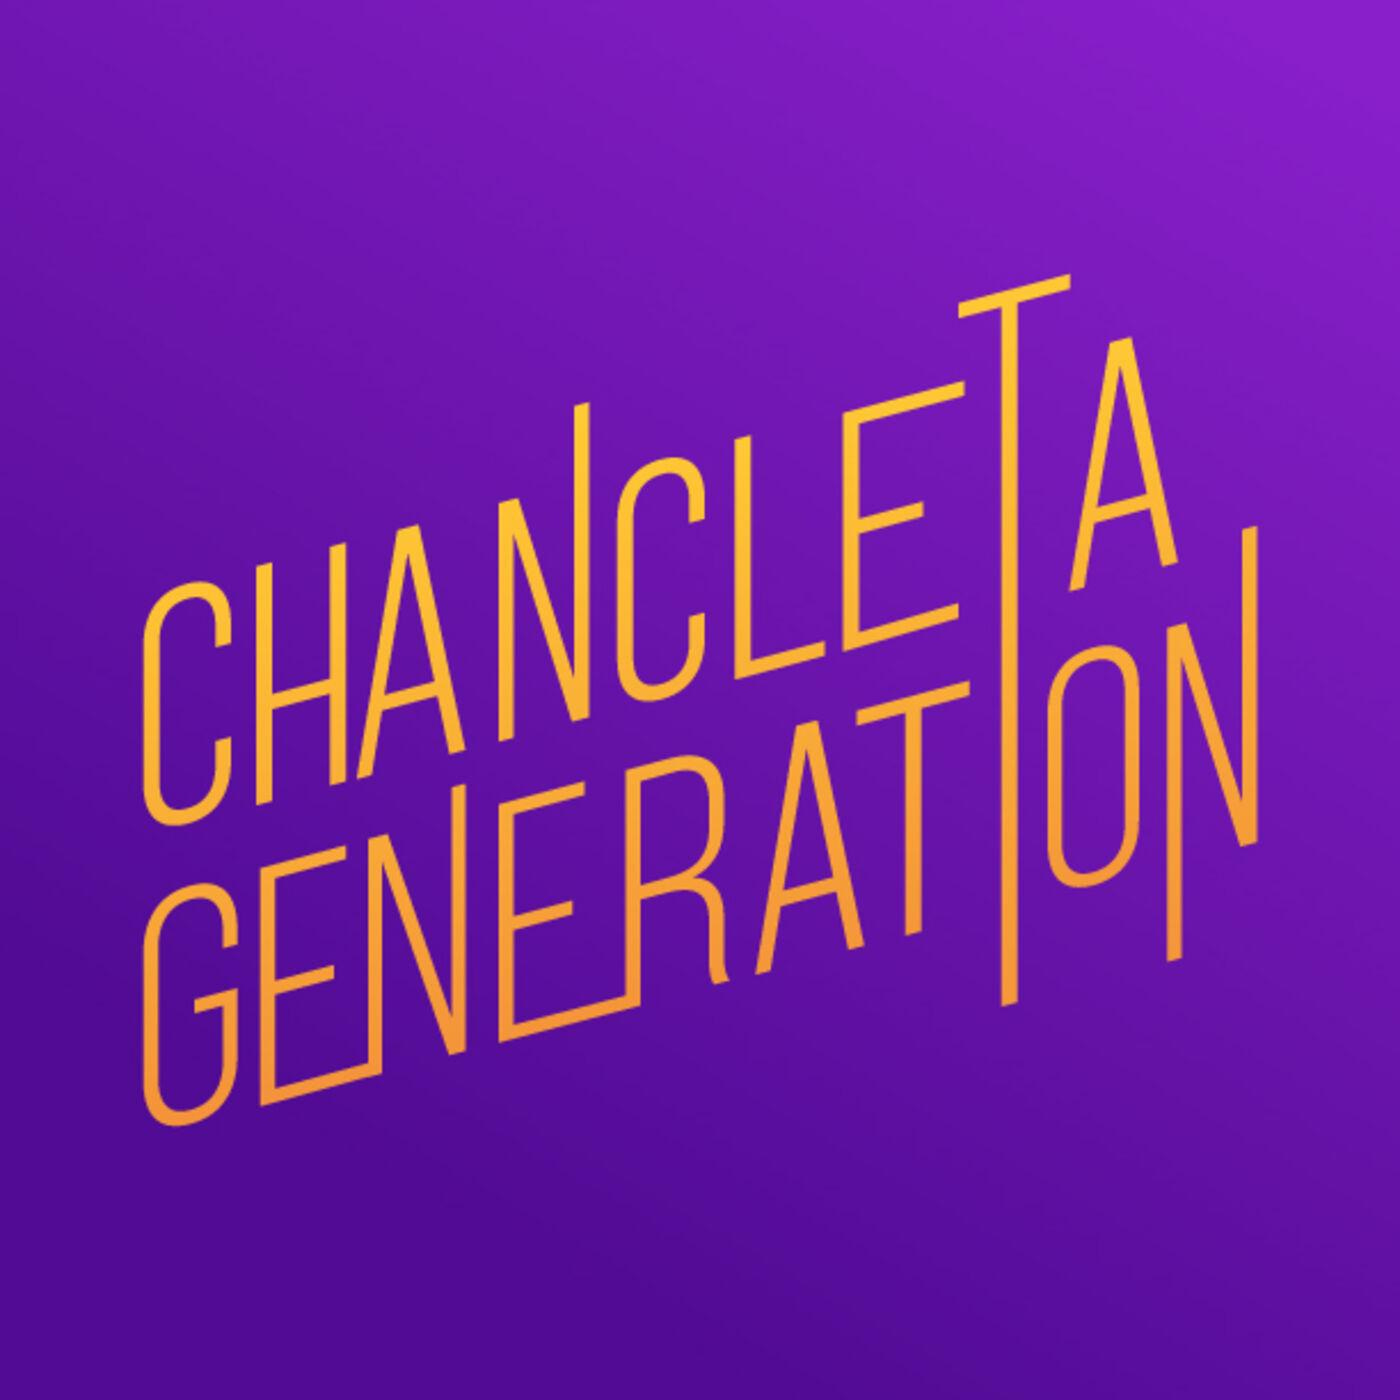 Podcast cover art for Chancleta Generation